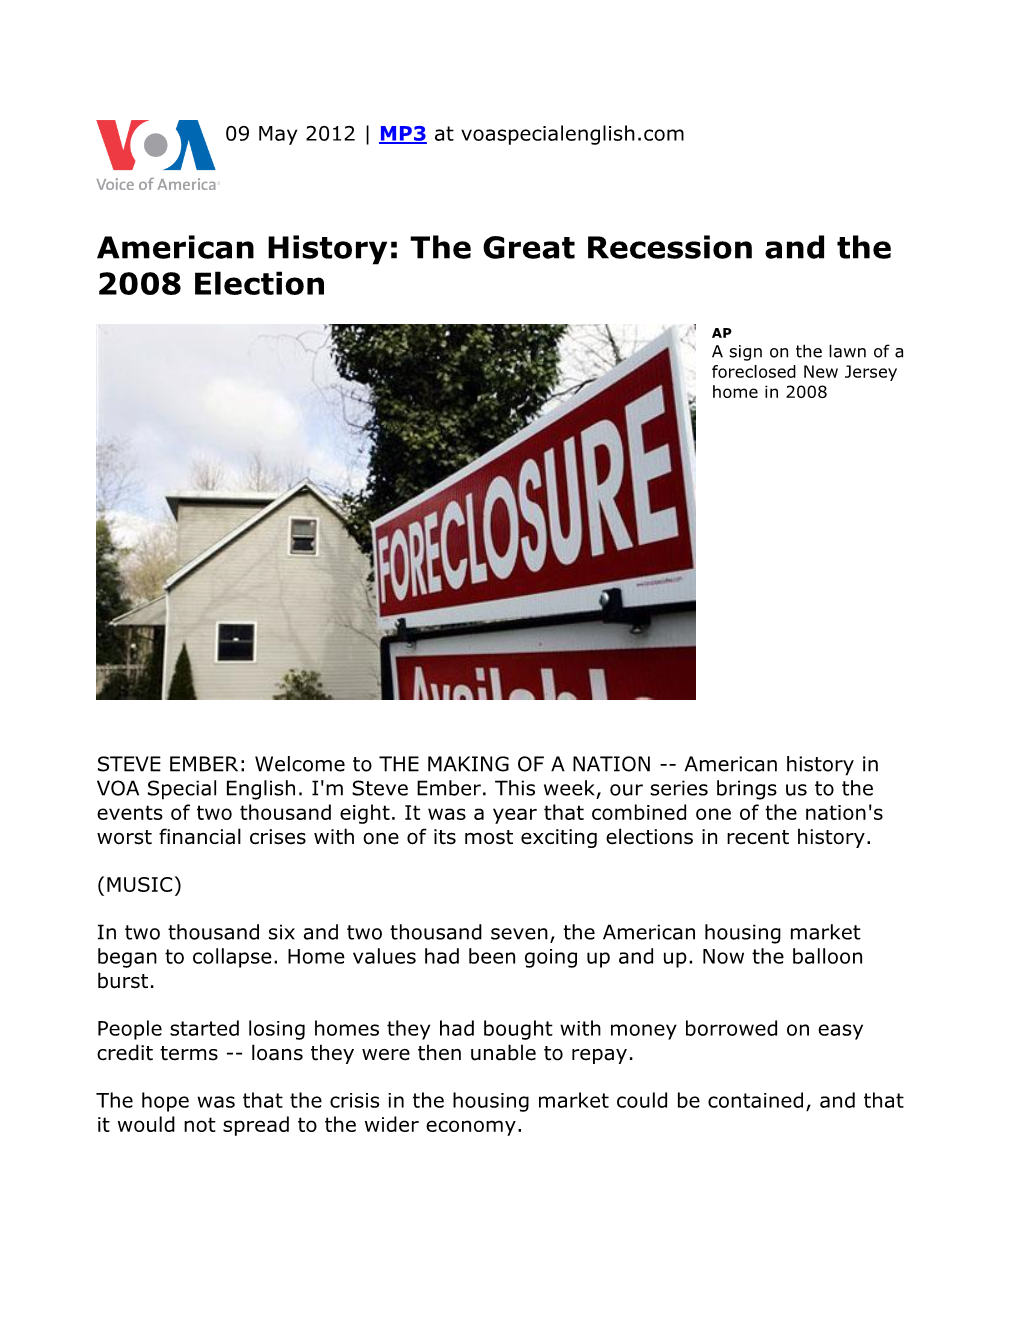 American History: the Great Recession and the 2008 Election